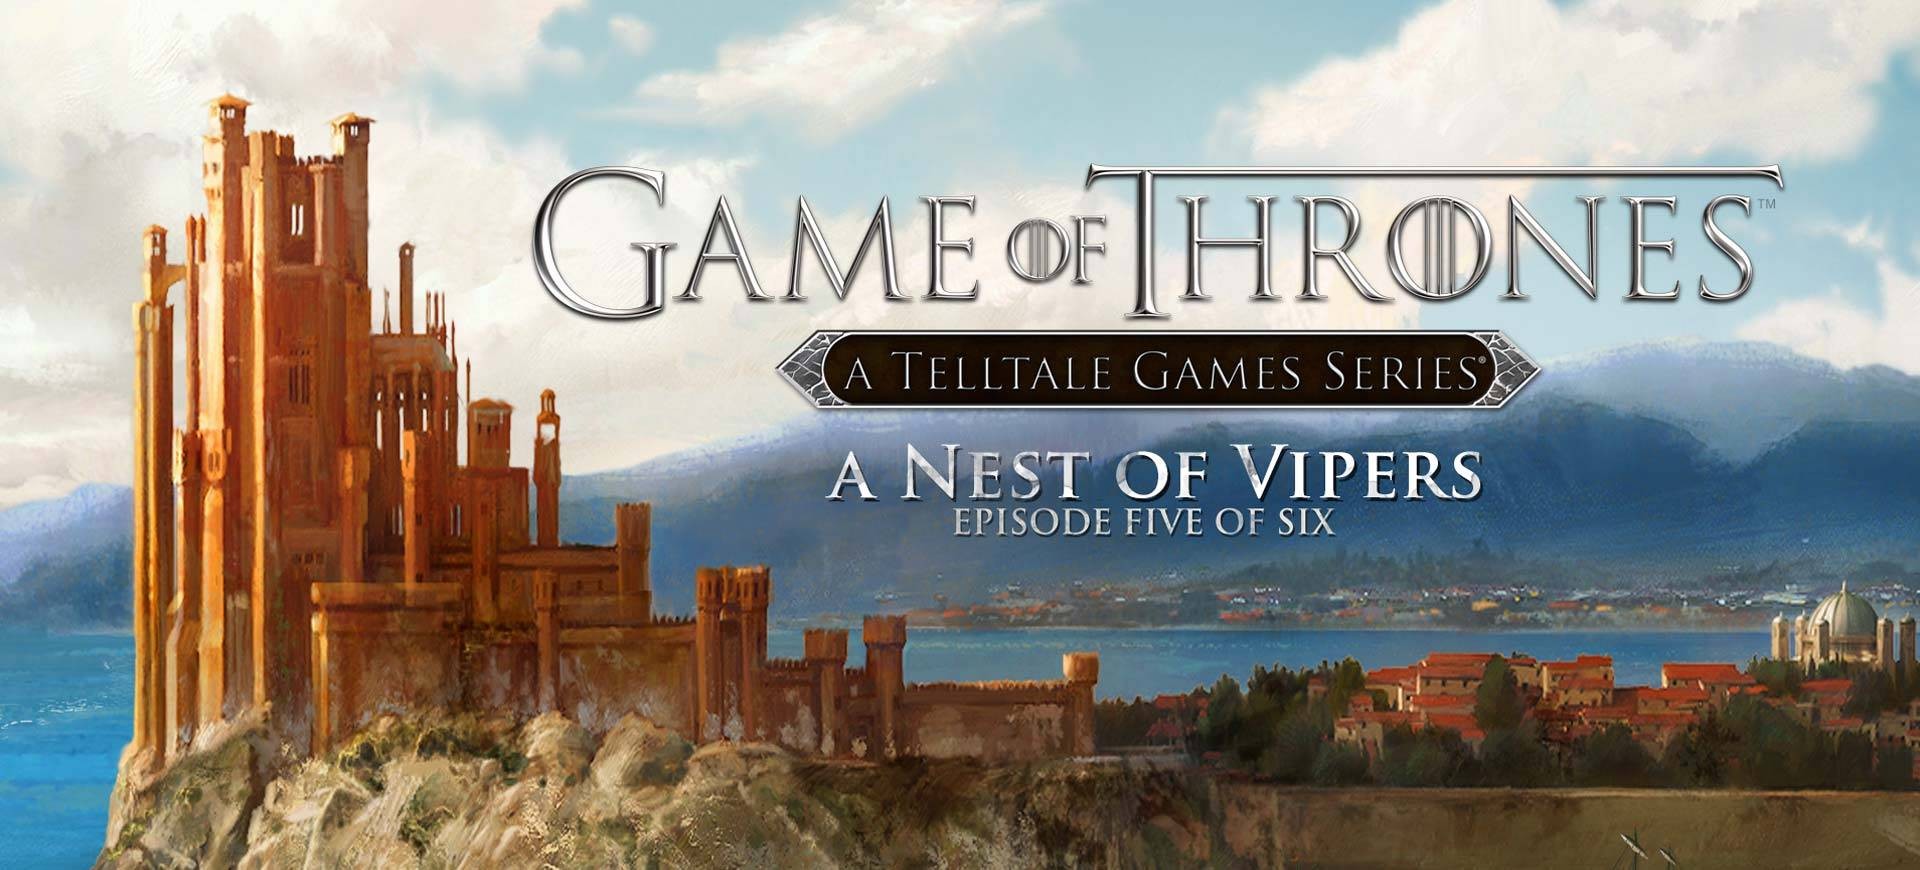 Game of Thrones - A Telltale Games Series - Ep 5: A Nest of Vipers - Đánh Giá Game